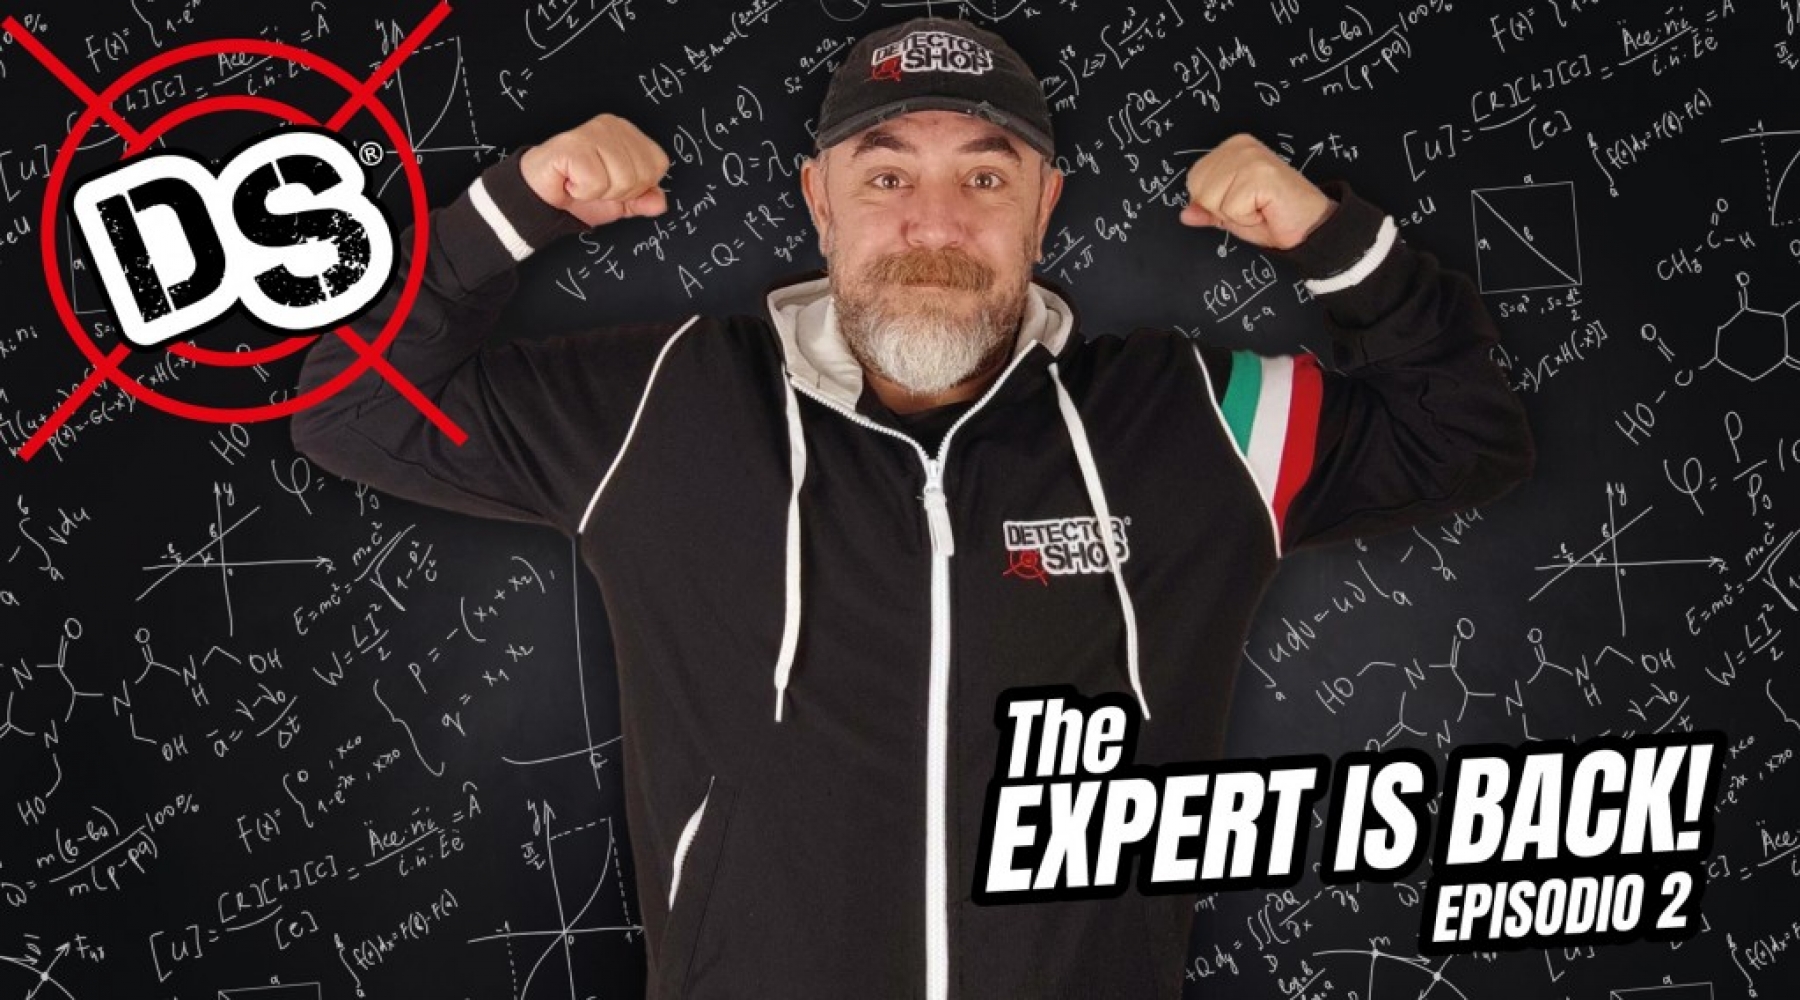 The Expert is back! Ep. 2